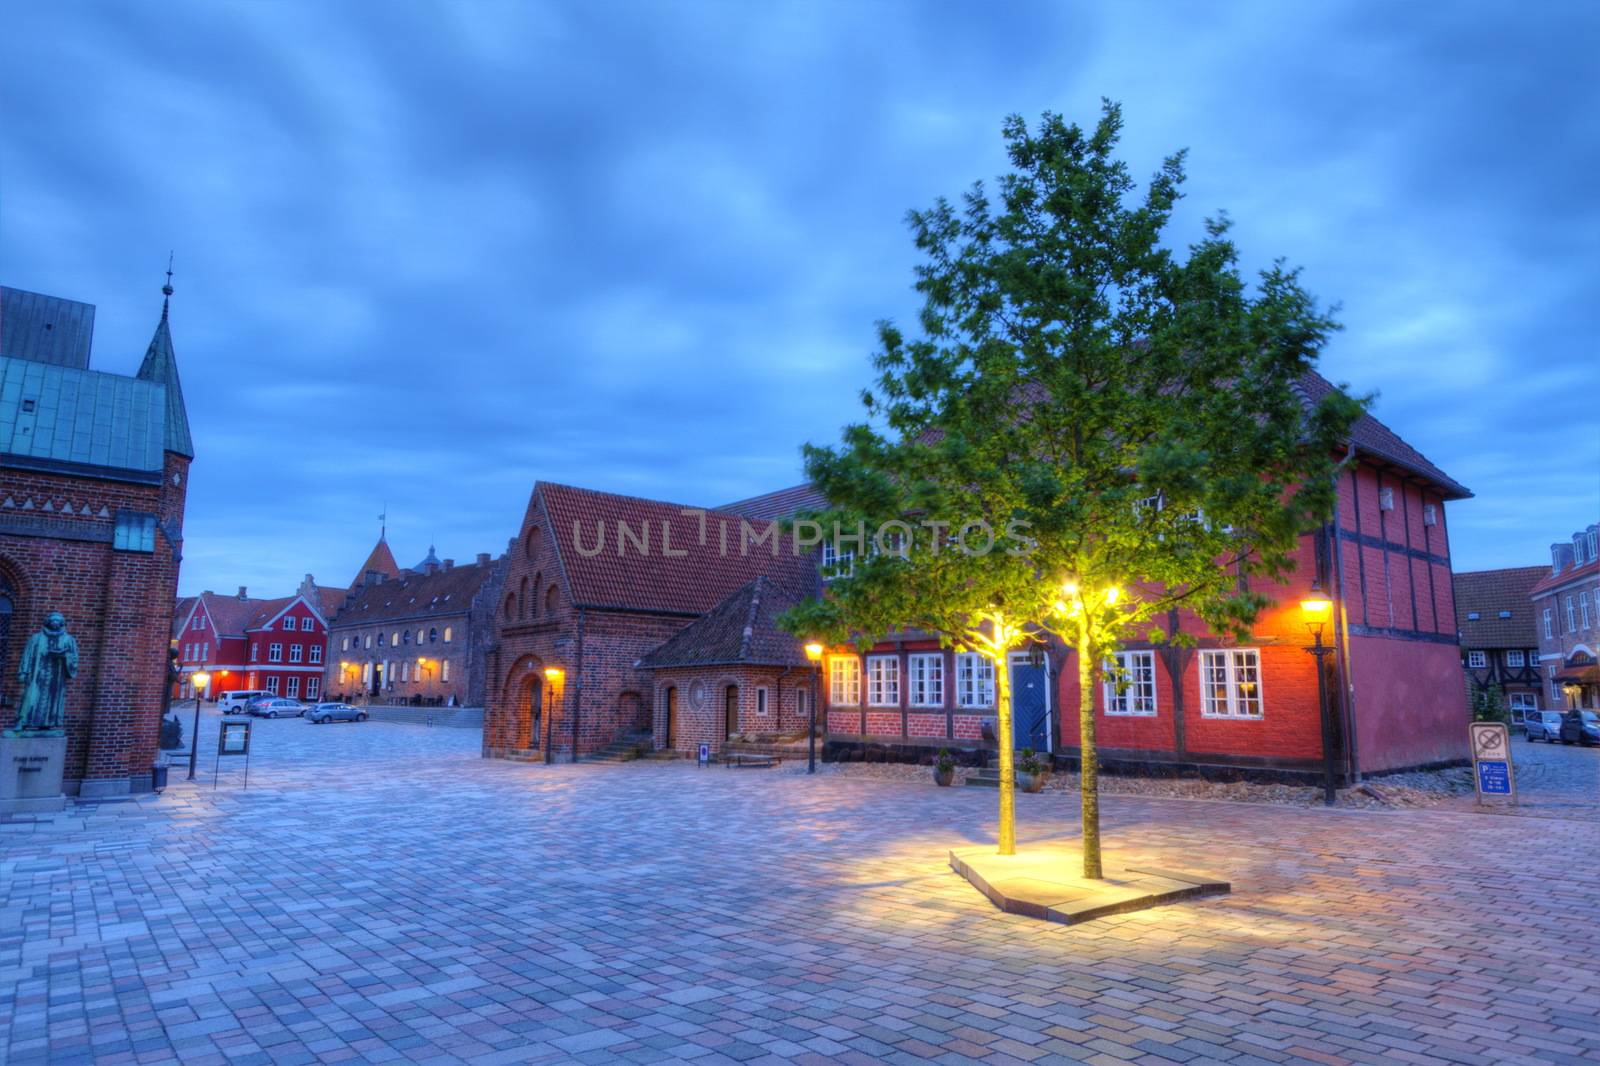 Street and houses in Ribe town, Denmark - HDR by Elenaphotos21